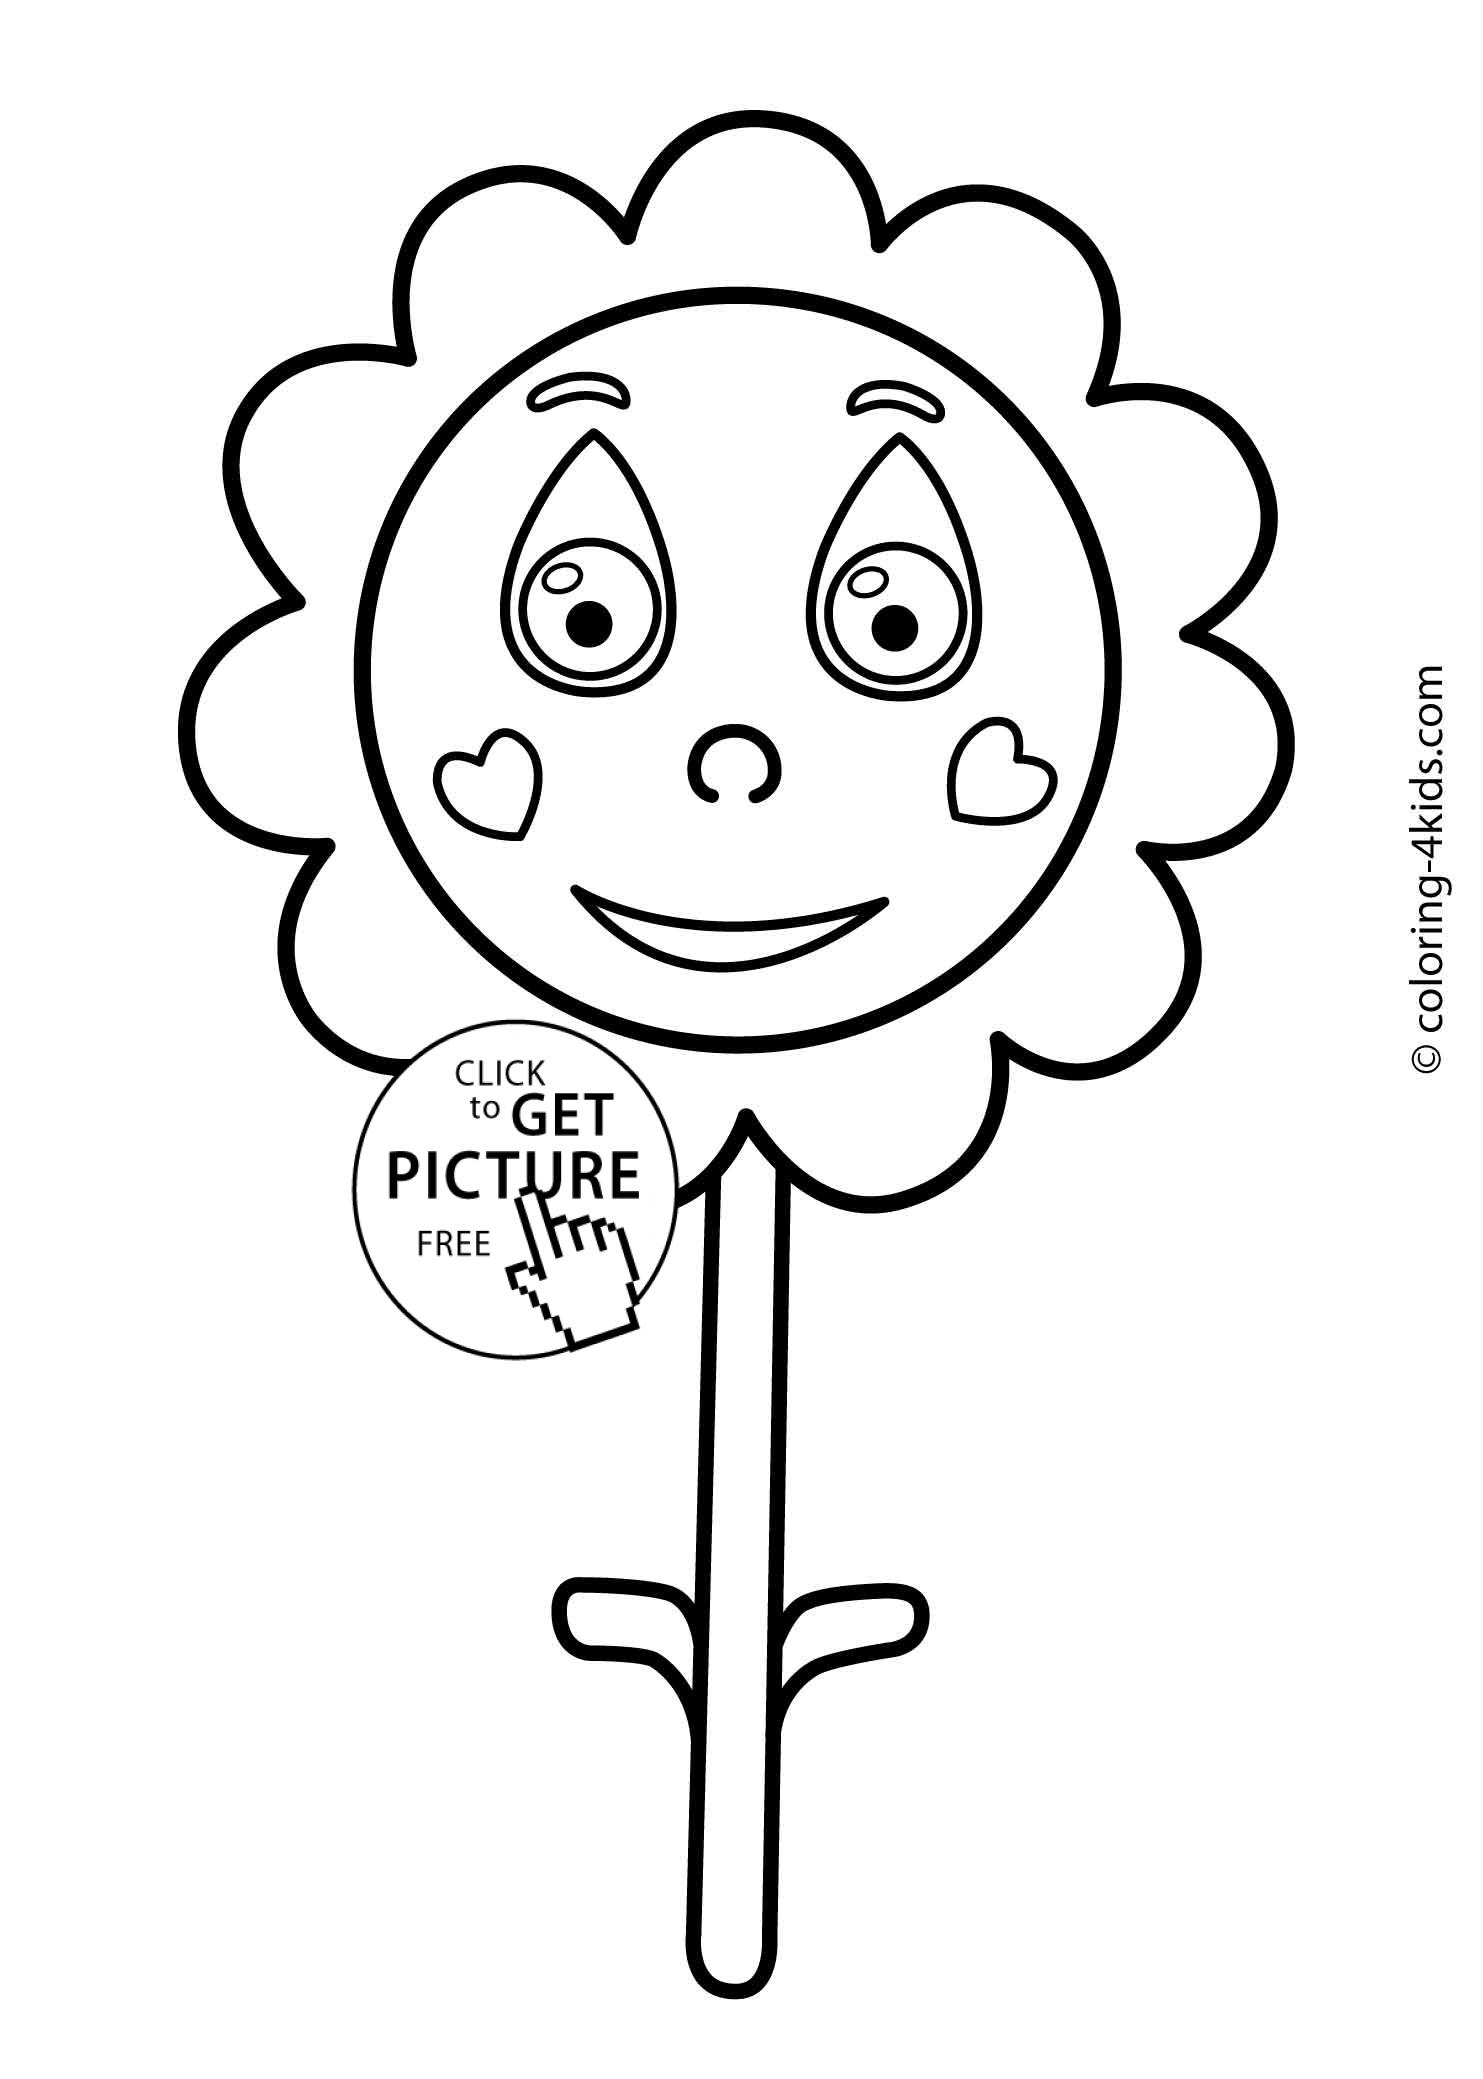 Flower coloring pages for kids, printable, 10 | coloing-4kids.com